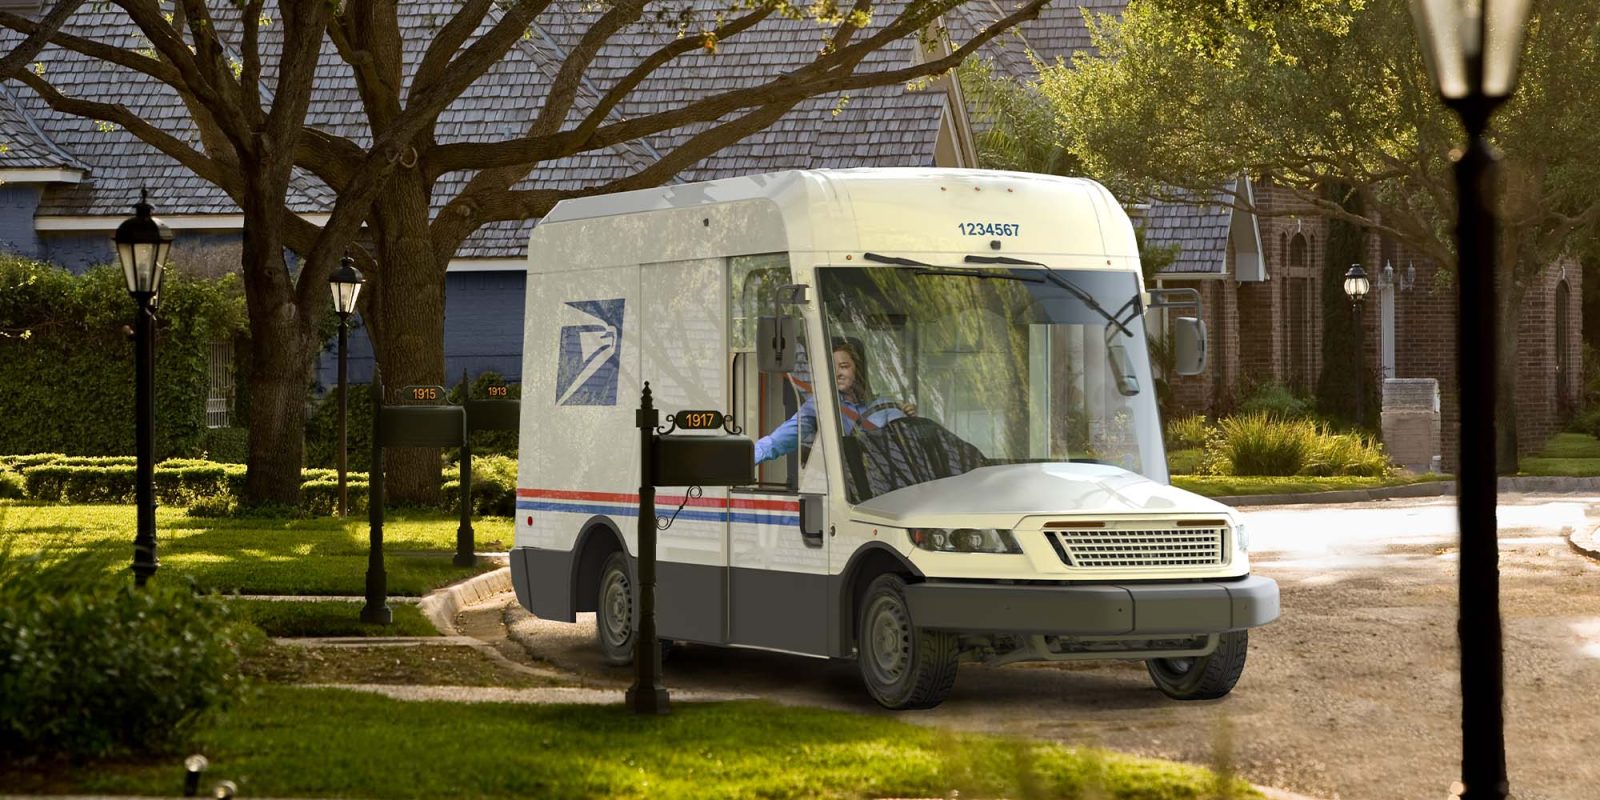 House votes to do away with massive USPS financial burden